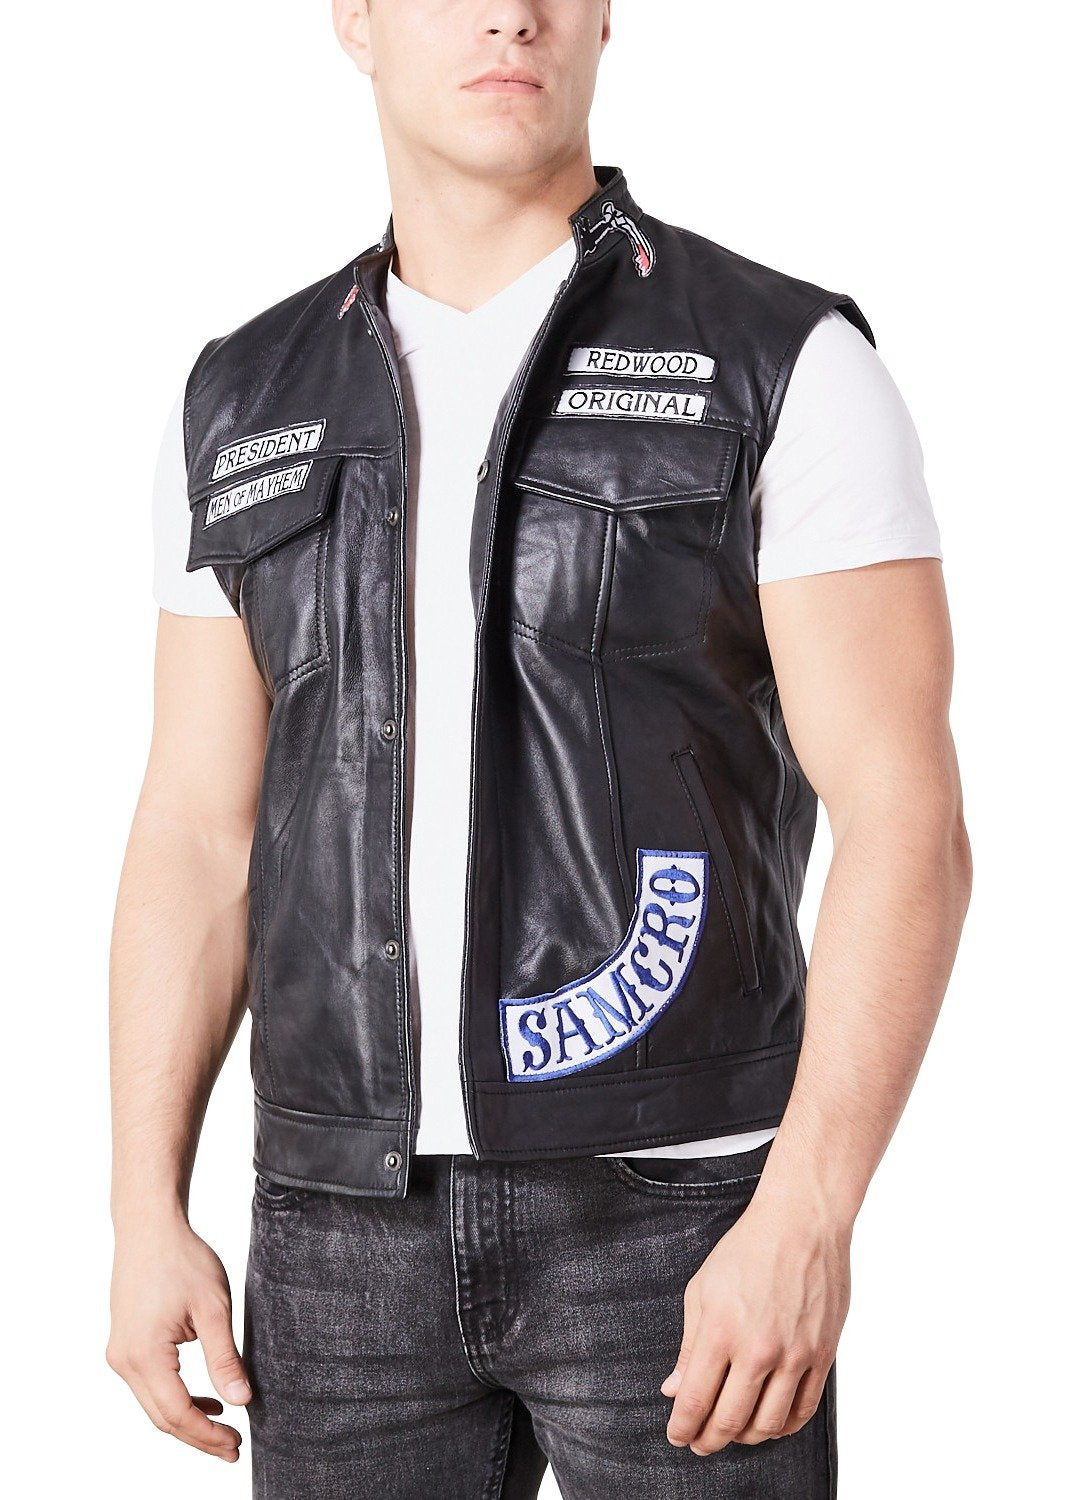 Sons of Anarchy Costume Replica Motorcycle Vest Leather